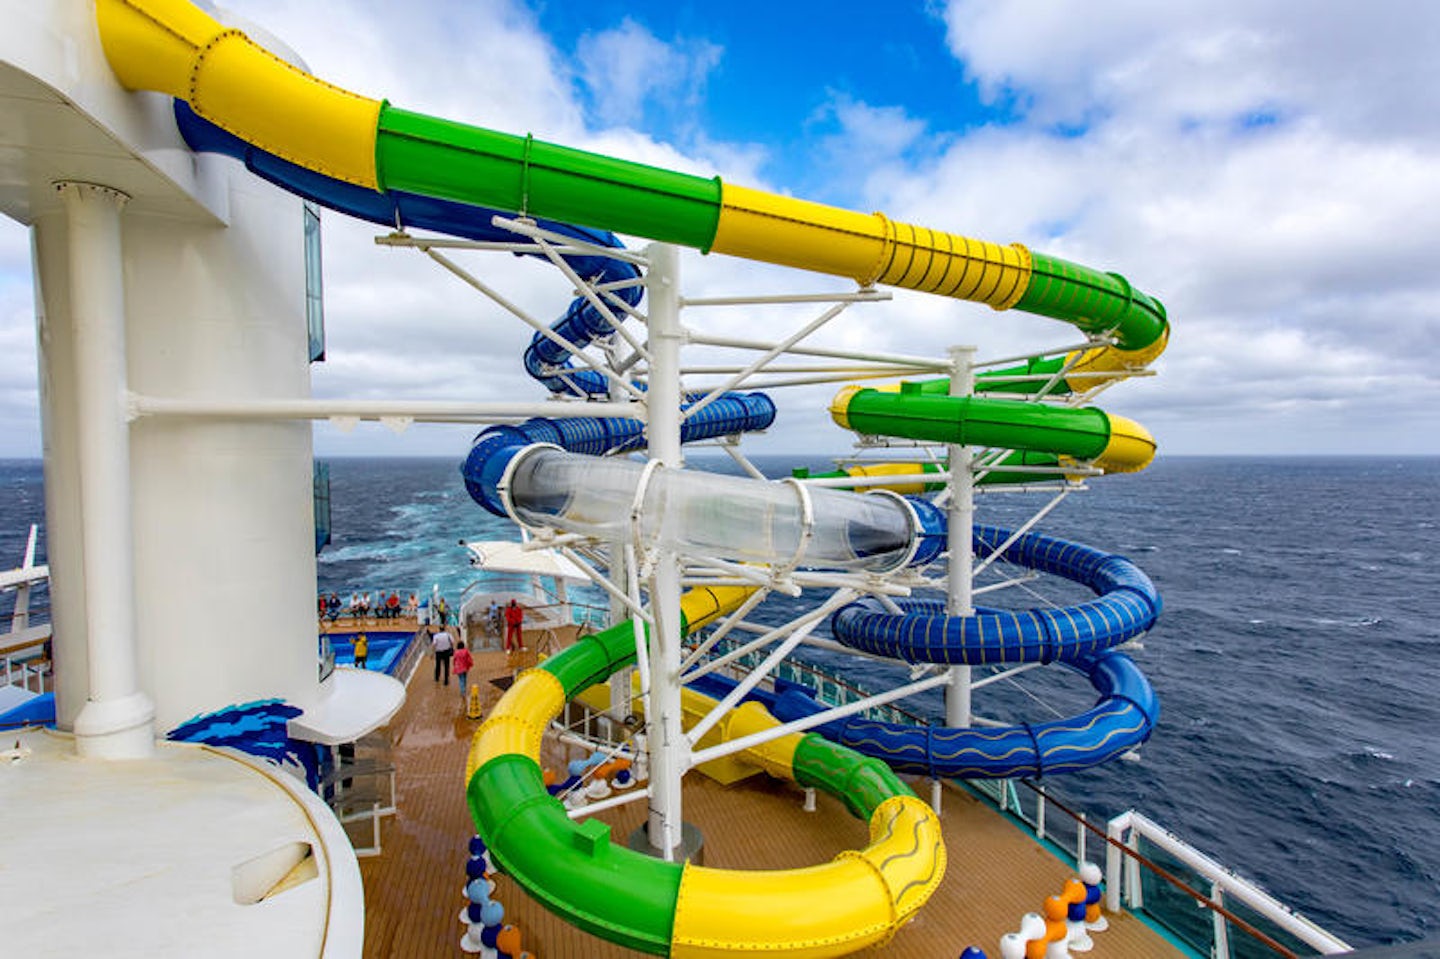 The Perfect Storm on Independence of the Seas